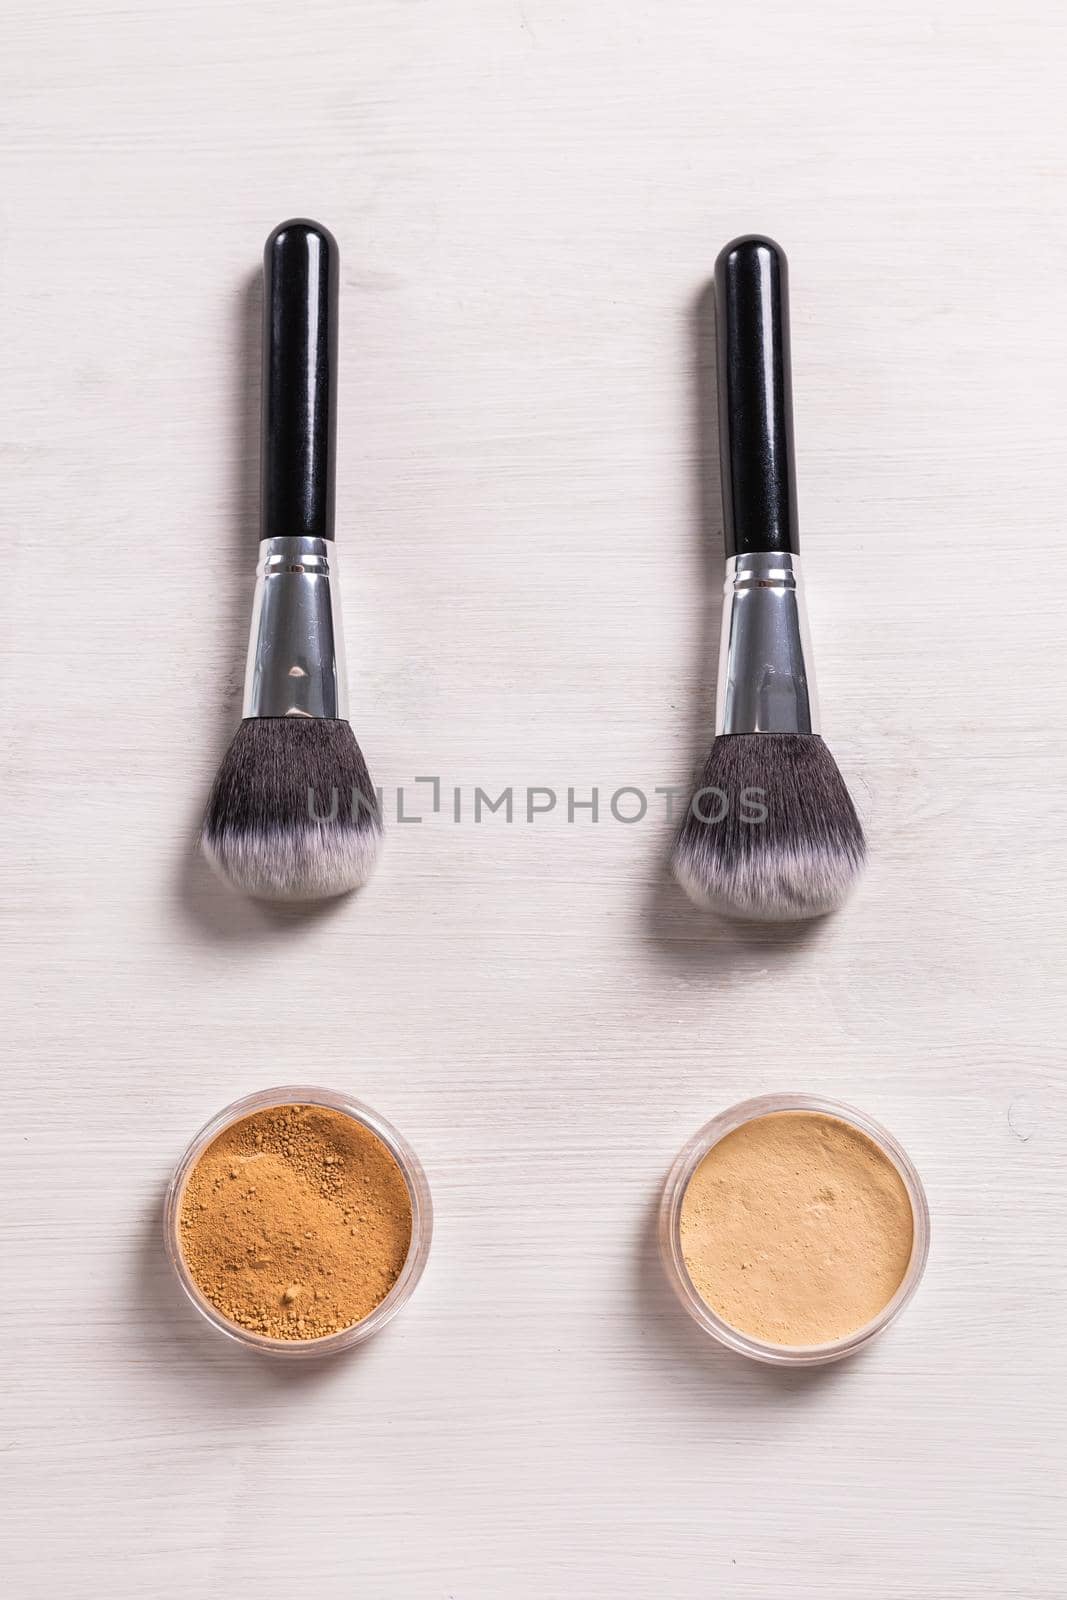 Mineral face powder and brush. Eco-friendly and organic beauty products by Satura86